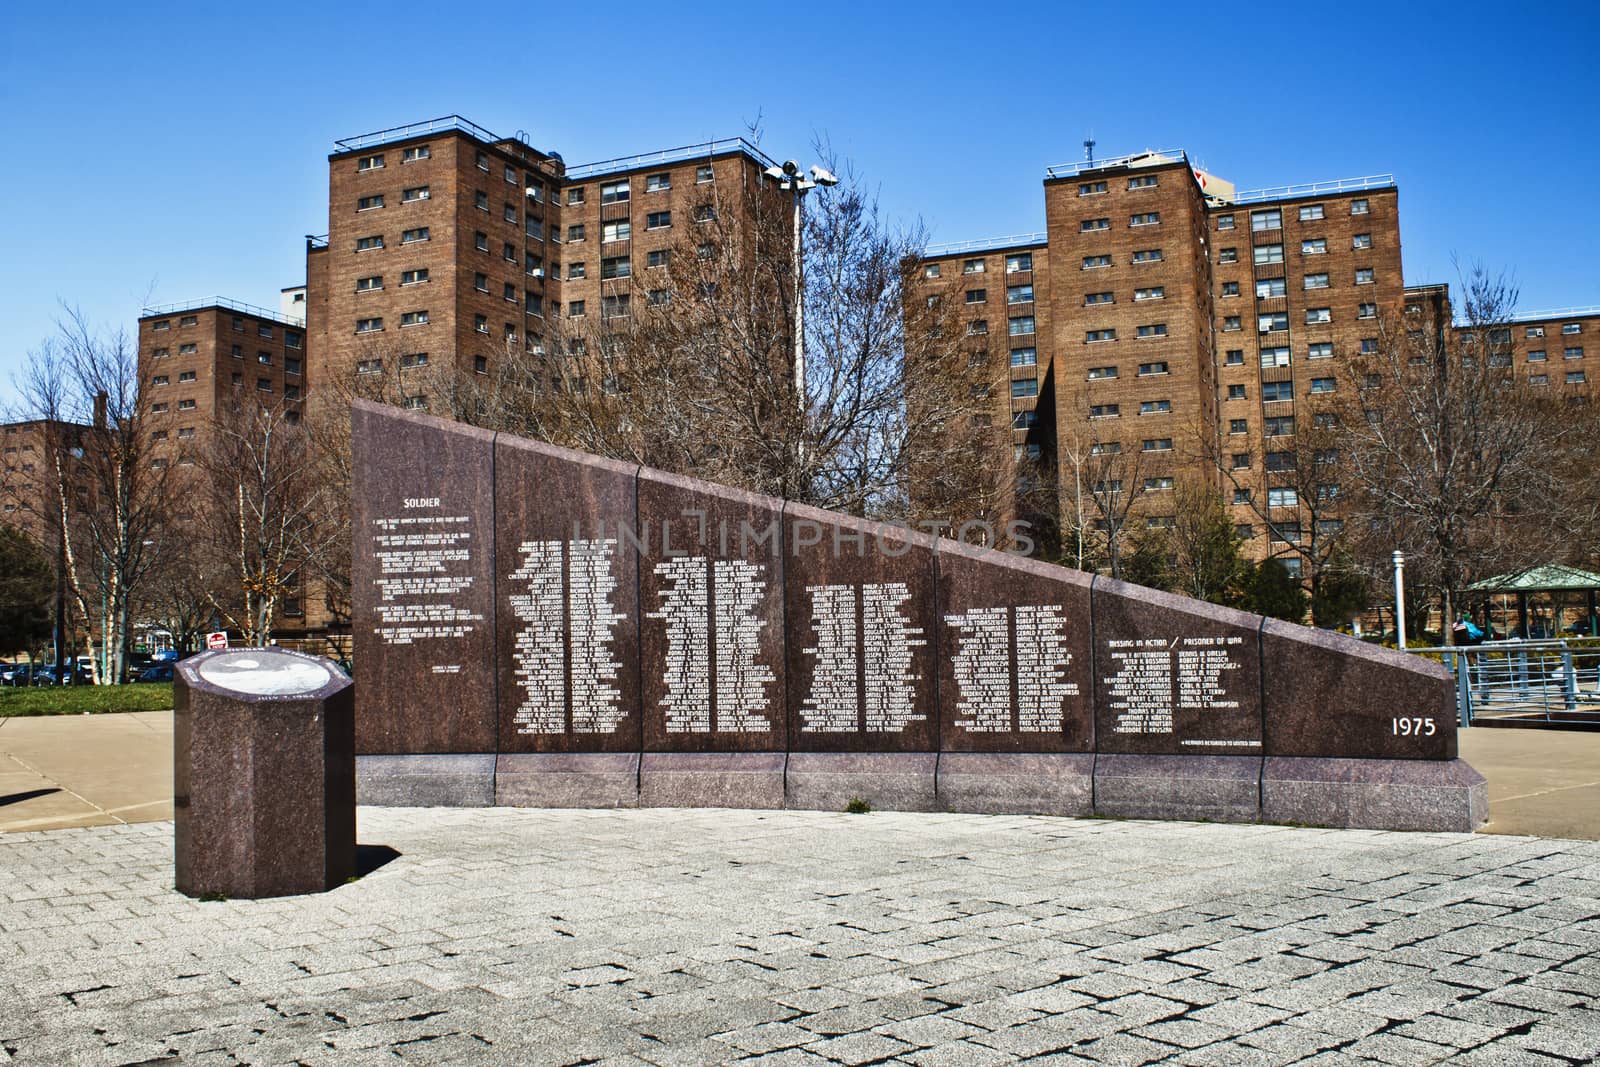 Marble wall with fallen soldier names stands tall in front of the city projects. 